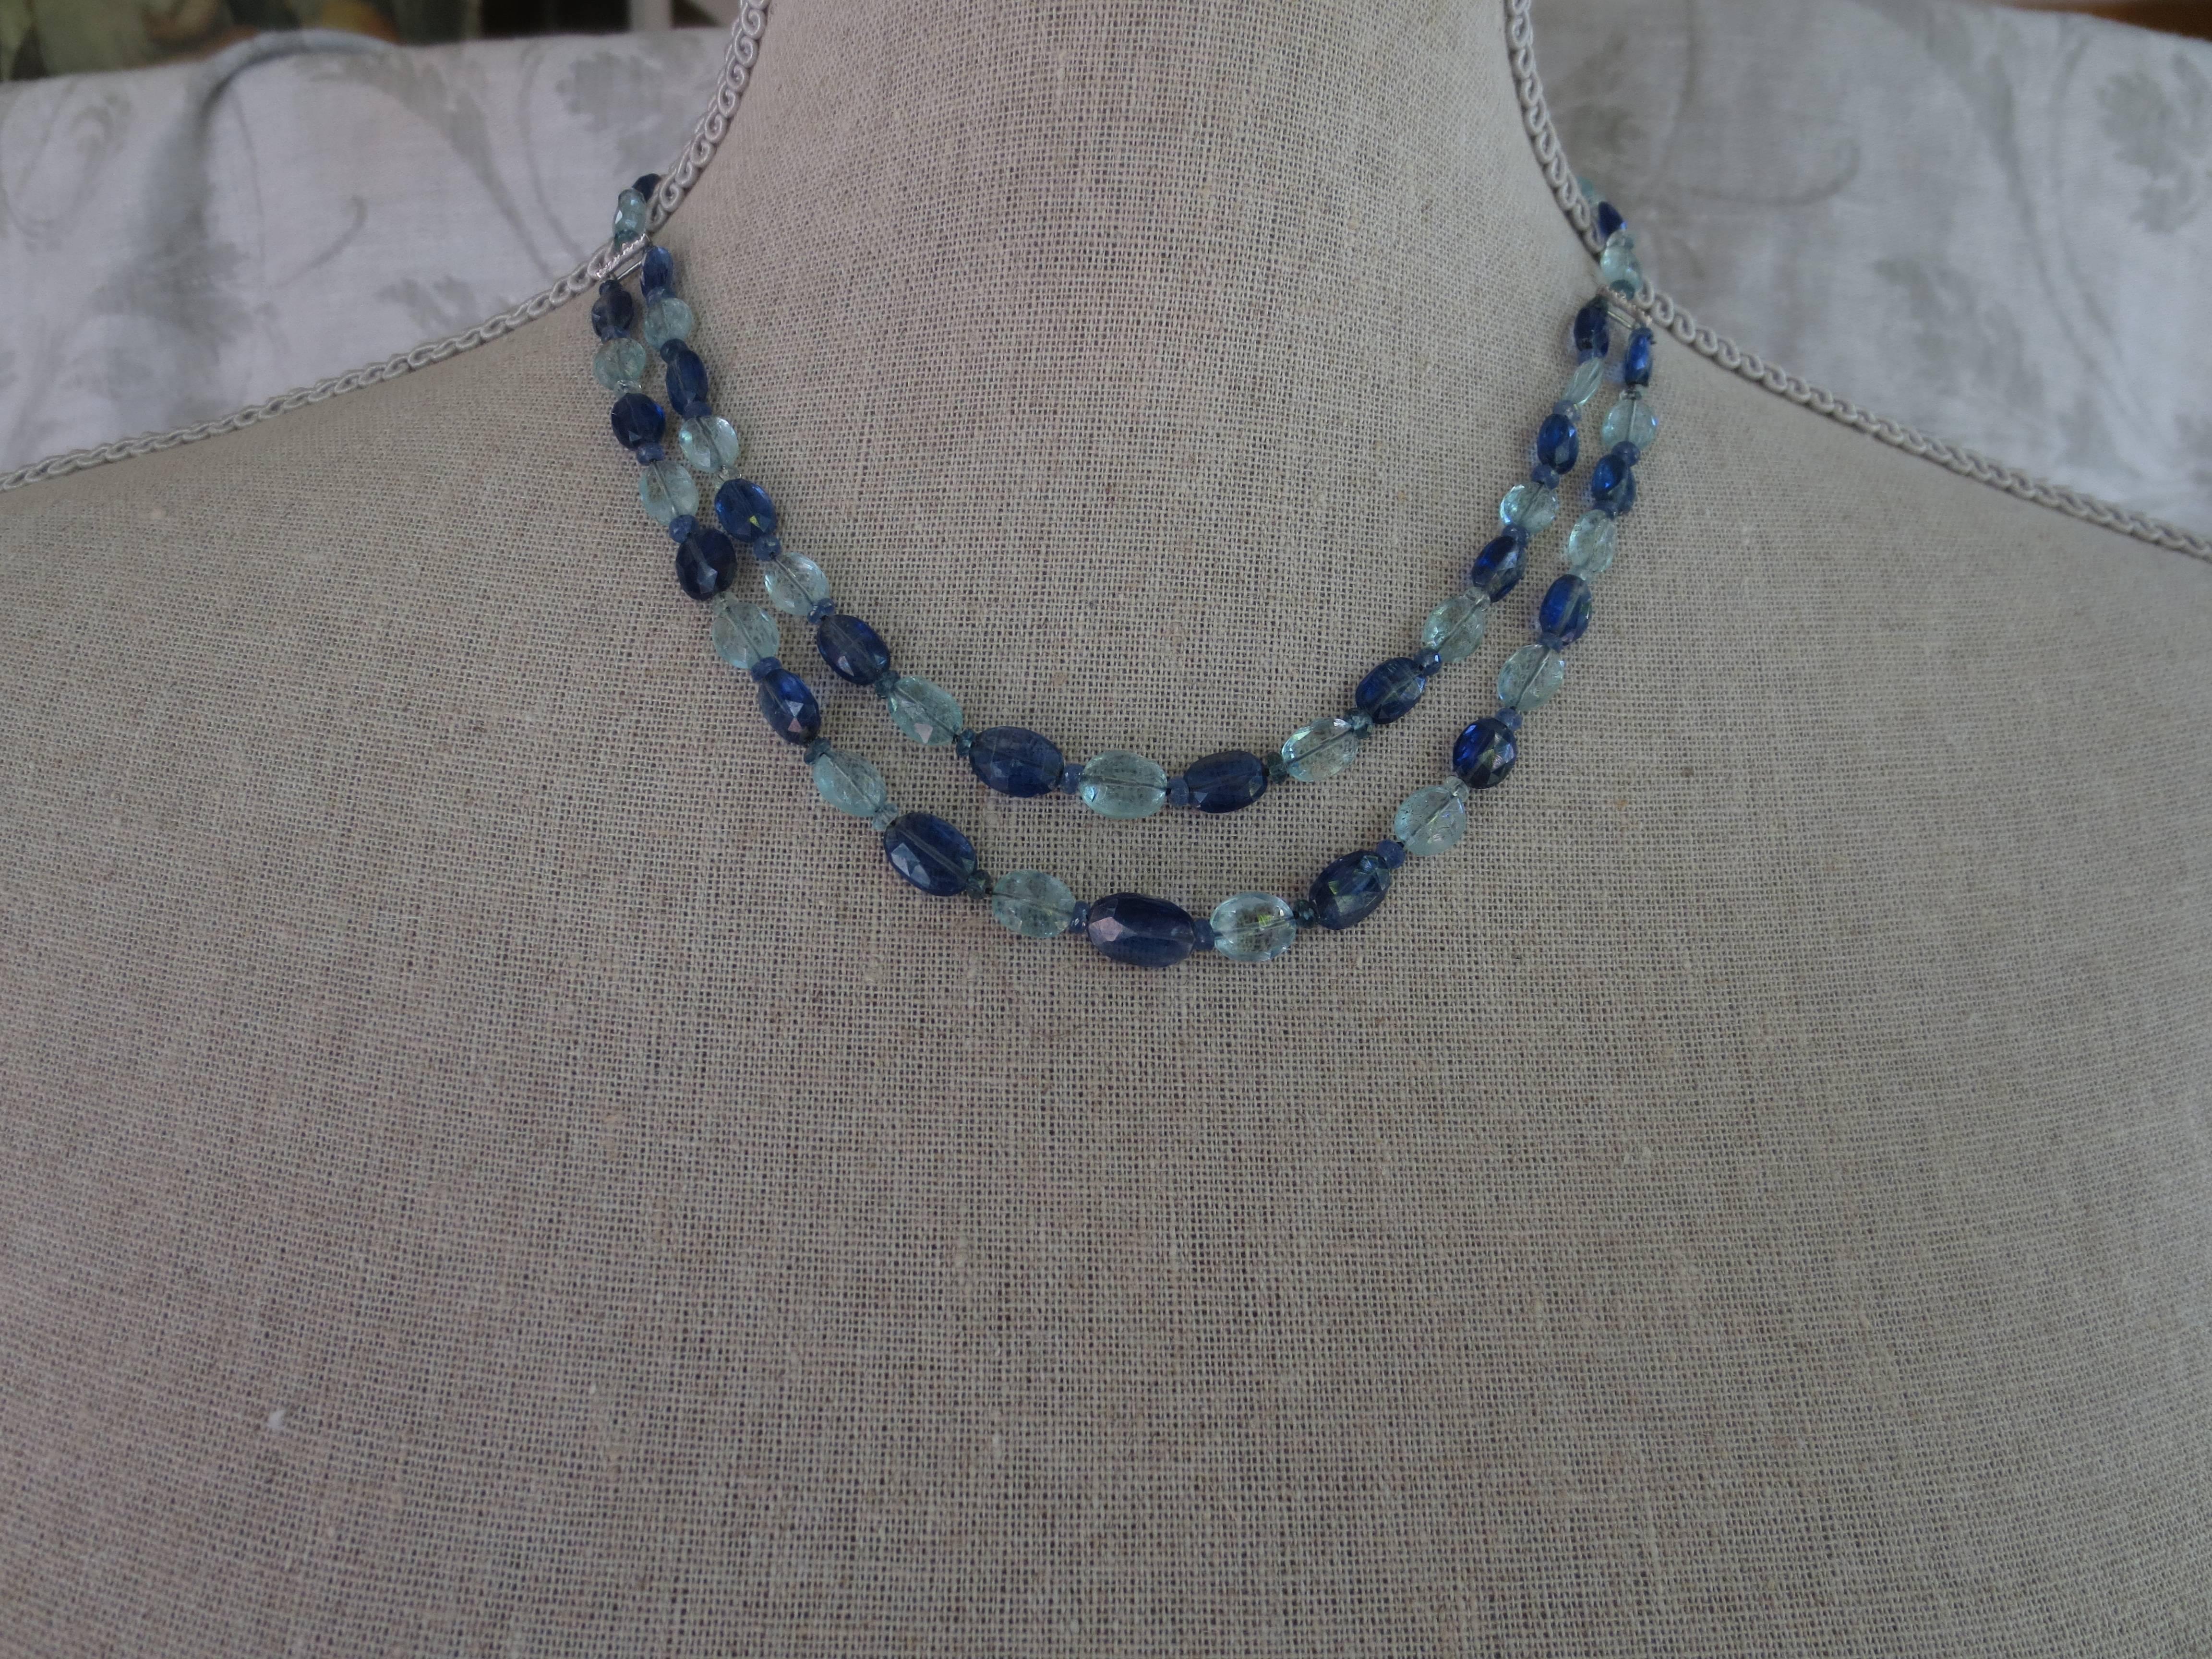 A sophisticated two-strand beaded necklace by Marina J of blue topaz and kyanite. One strand nestles atop the other. This necklace has a 14 karat white gold clasp and a gold and diamond bar and is 17 1/2 inches long. A very versatile look.